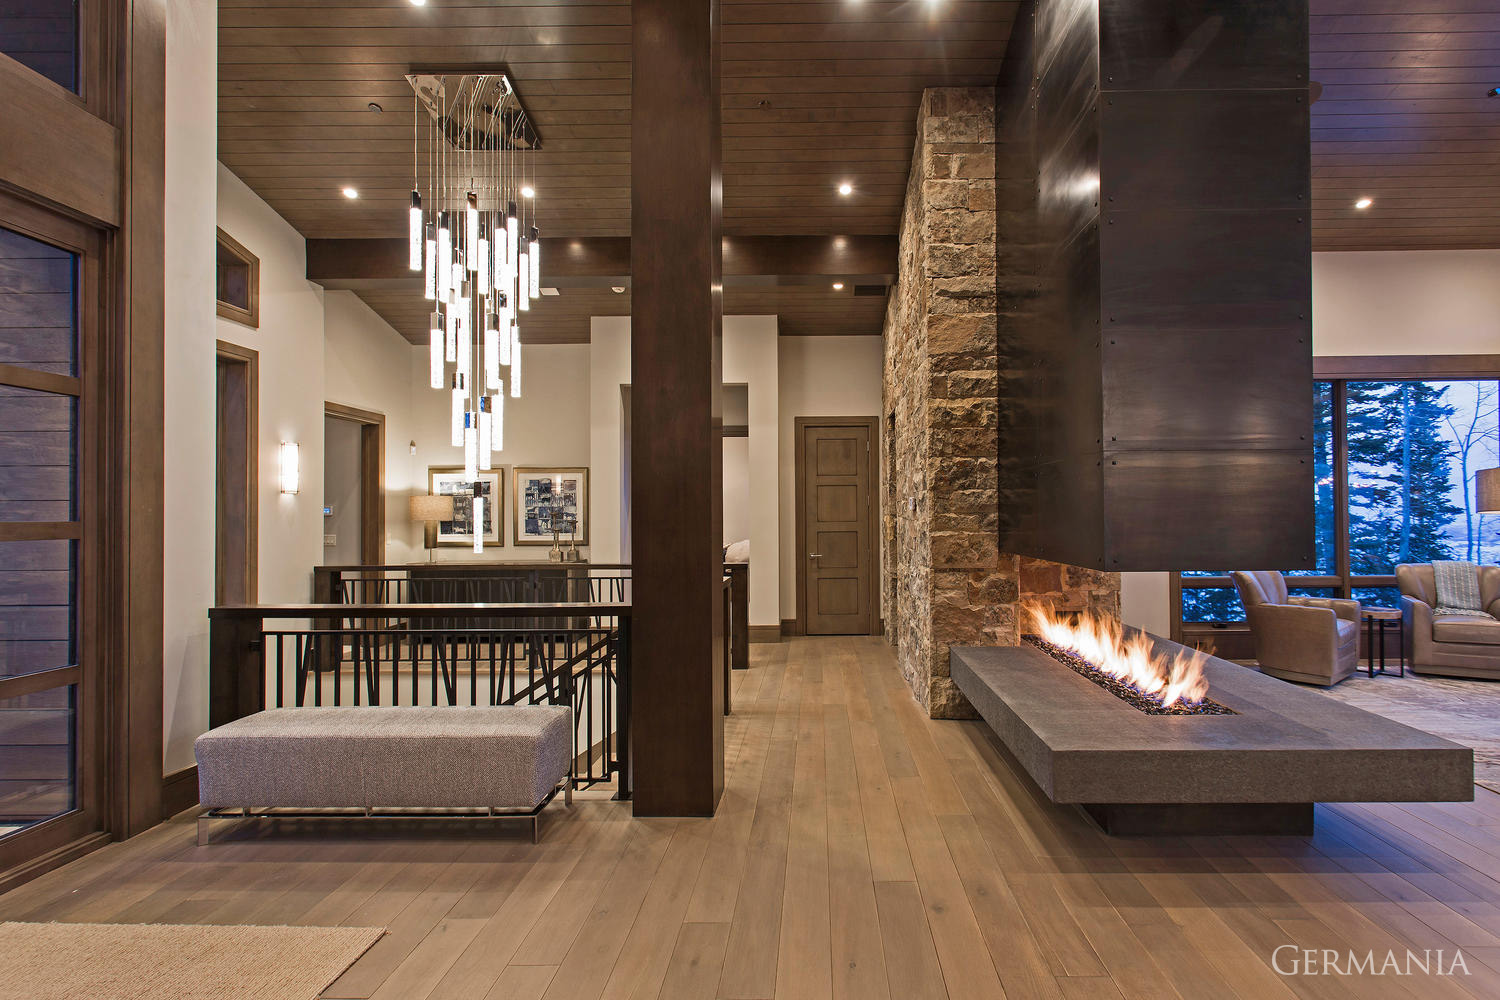 Our custom home building features custom light fixtures and fireplaces. The entry way to your custom home sets the mood.